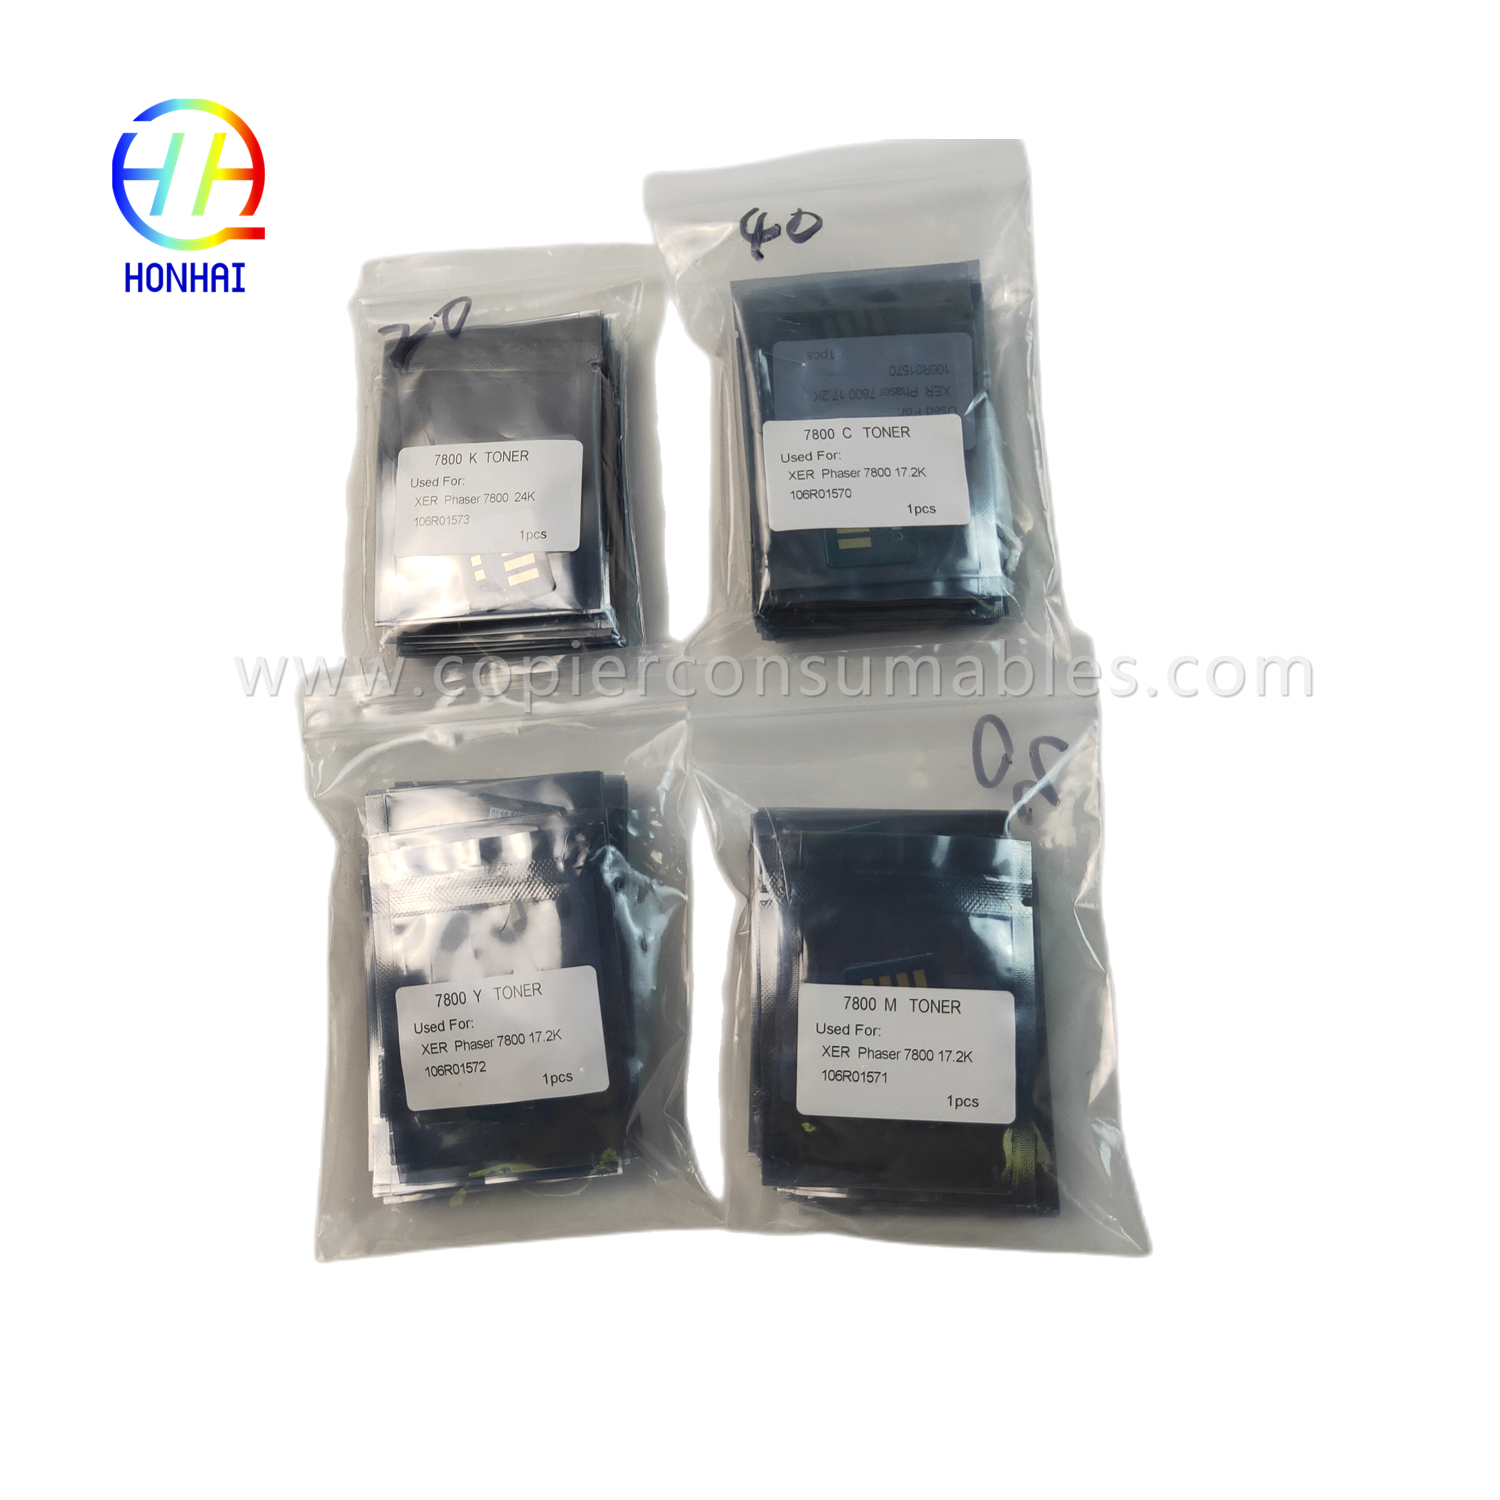 https://c585.goodao.net/toner-chip-set-for-xerox-phaser-7800-106r01573-106r01570-106r01571-106r01572-chip-2-product/